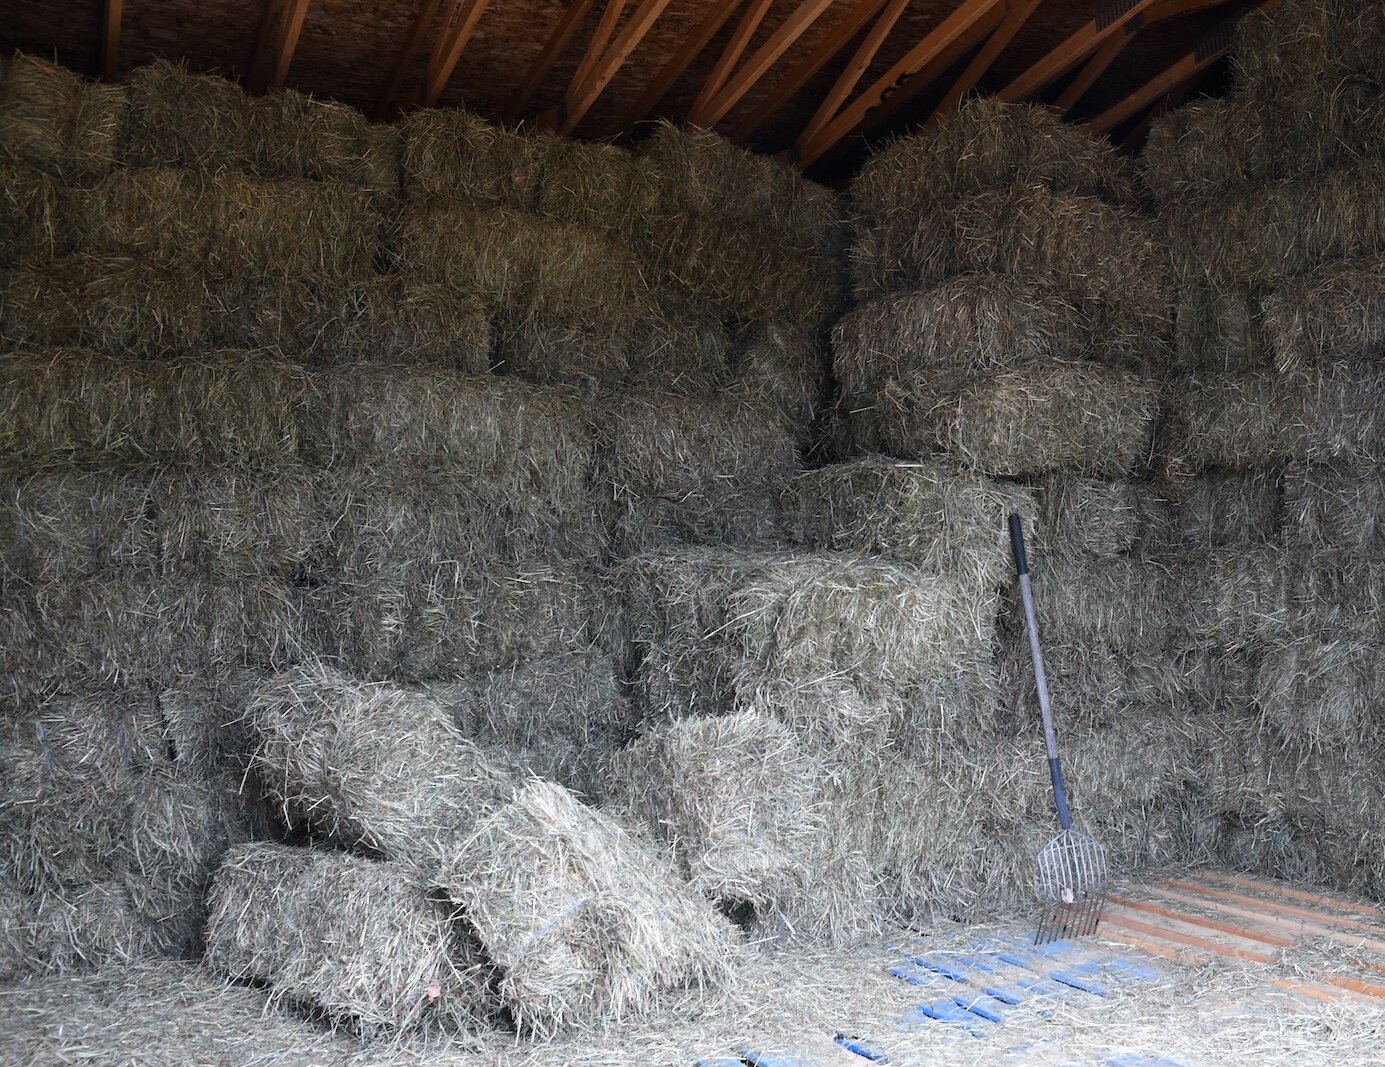 The horses at Paint Pony Haven go through many bales of hay.